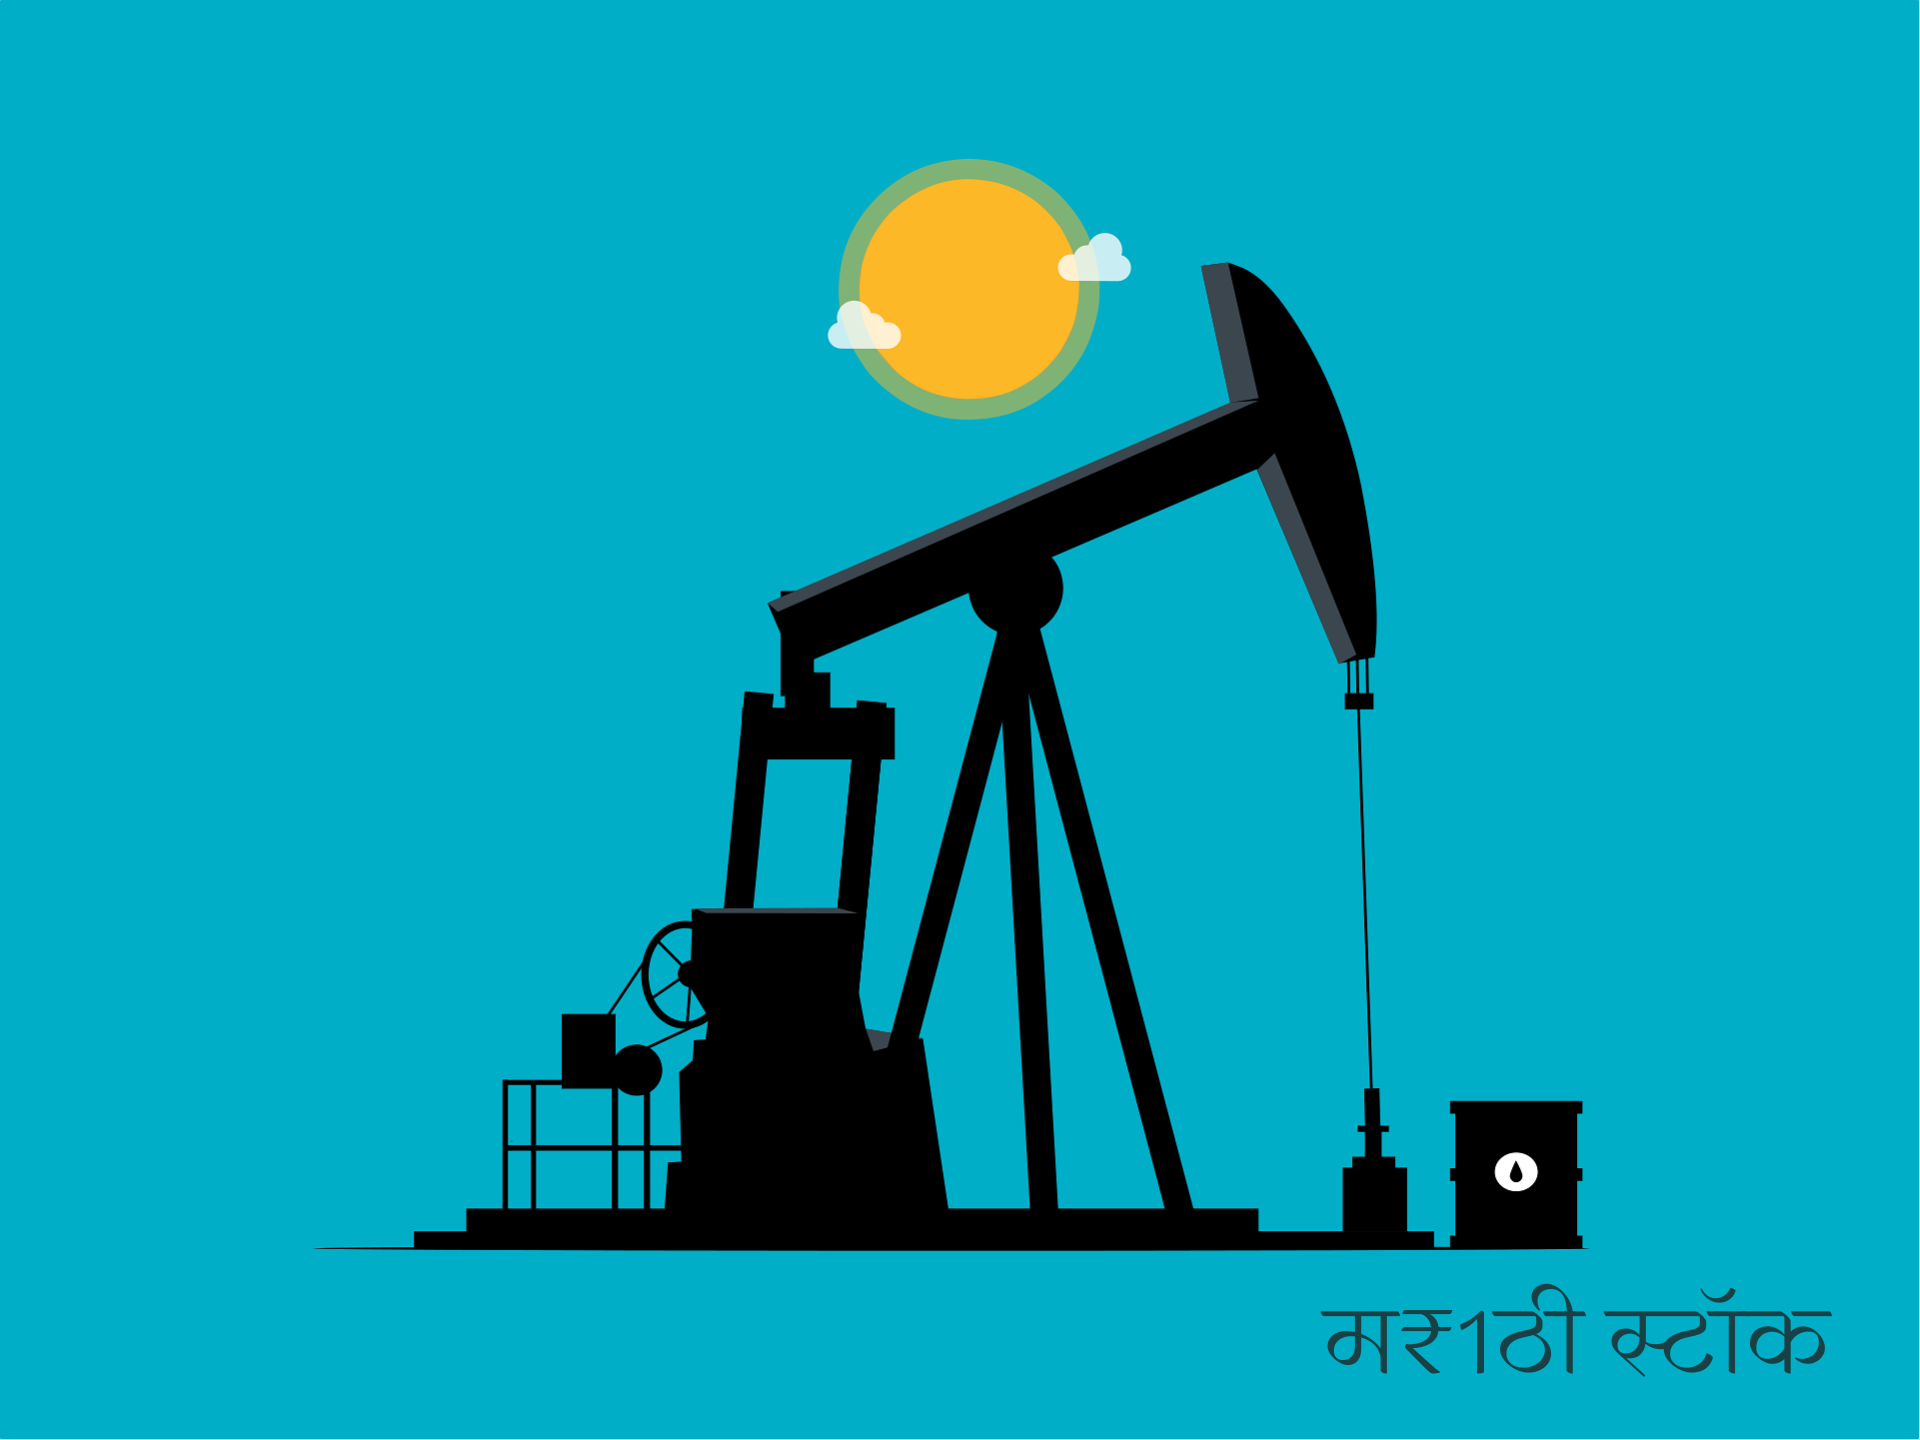 What is crude oil in marathi